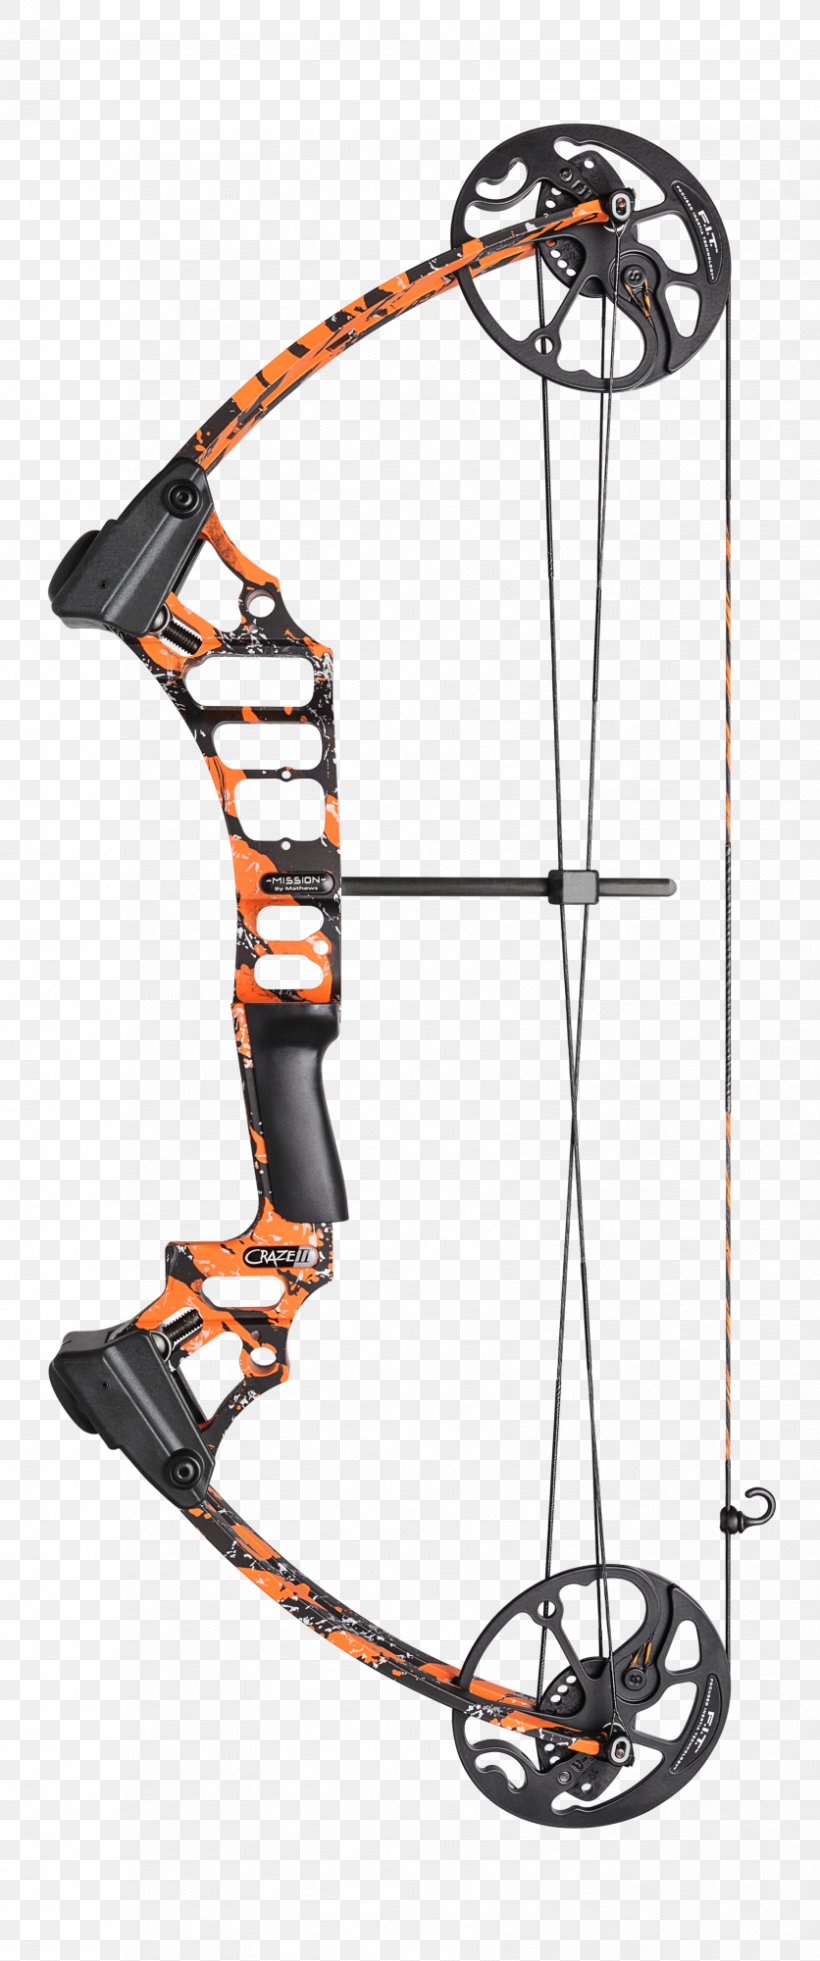 Compound Bows Archery Bow And Arrow Bowhunting, PNG, 836x2000px, Compound Bows, Archery, Archery Country, Ballistics, Bow And Arrow Download Free